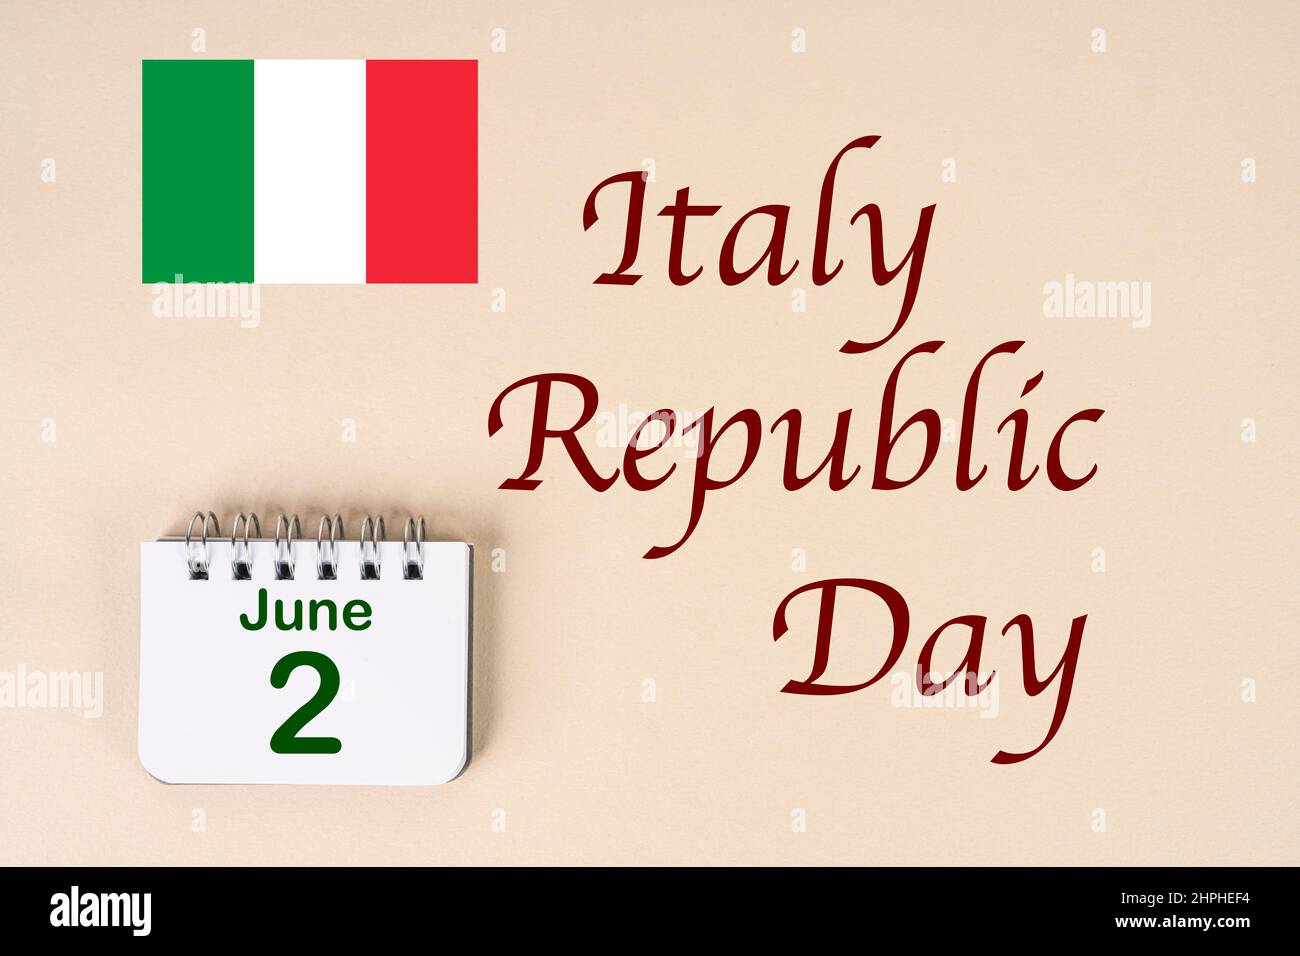 The celebration of Italy Republic Day with the Italian flag and the calendar indicating the June 2. Stock Photo